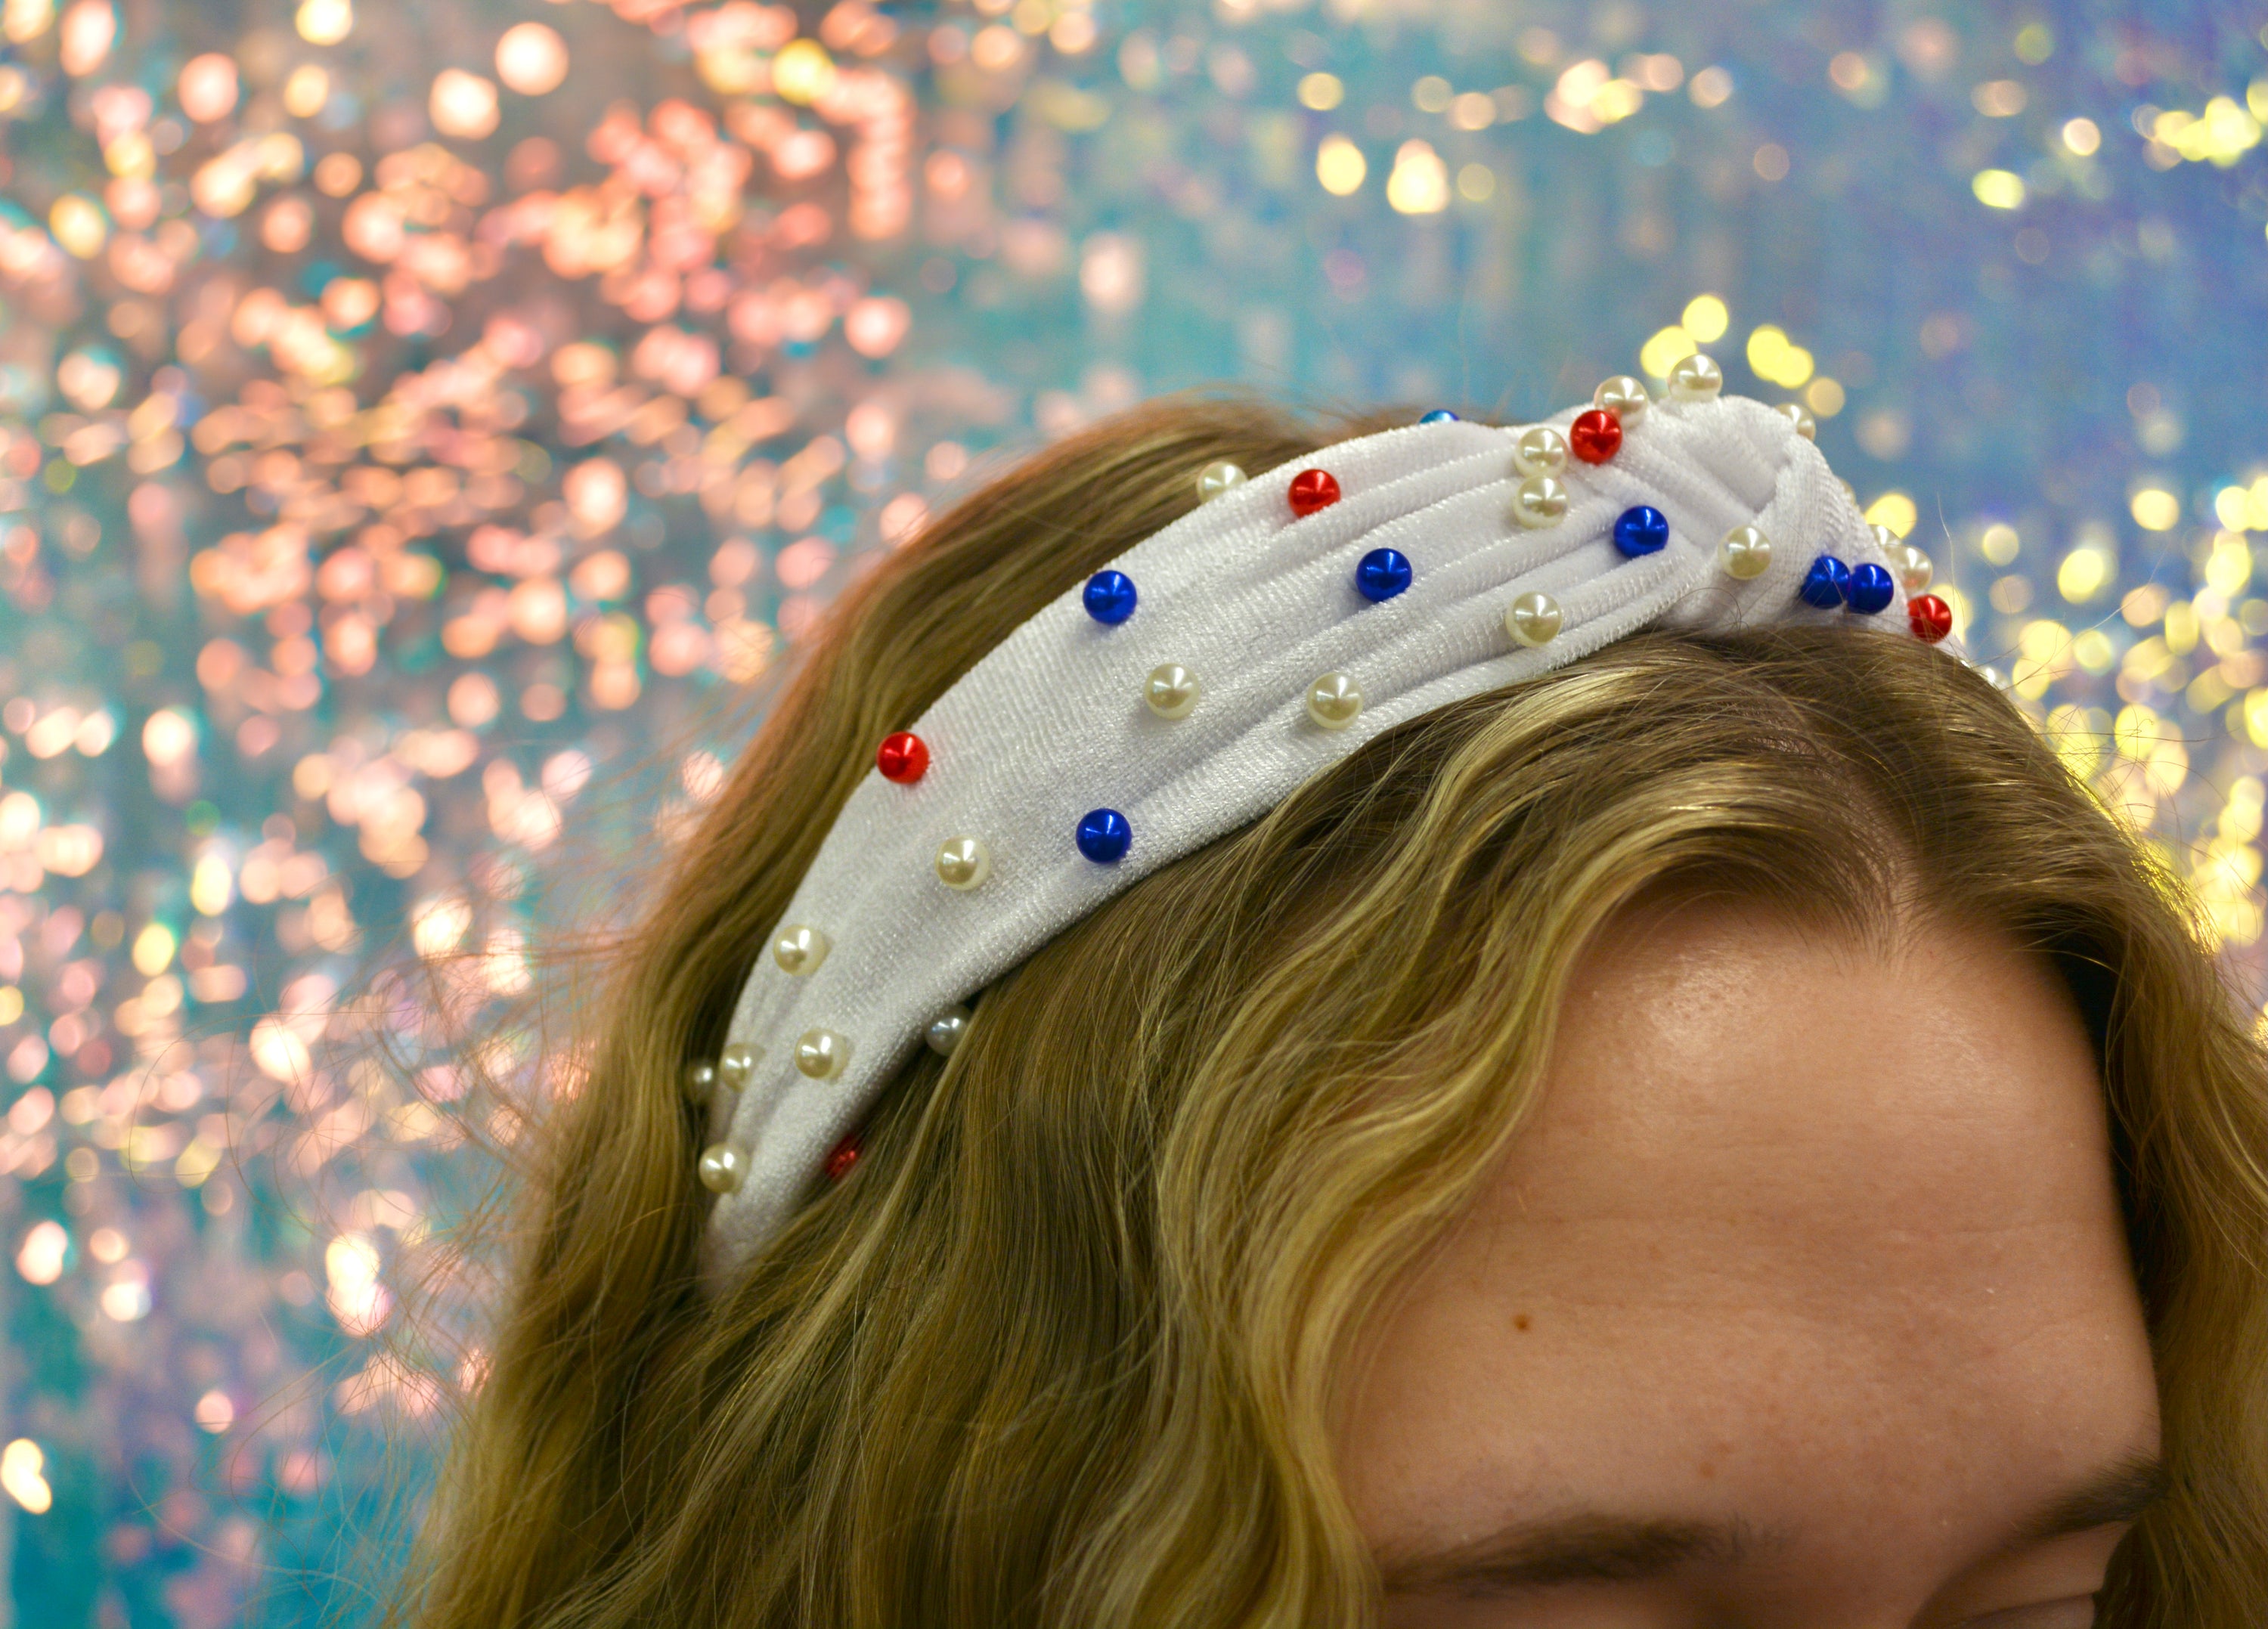 Courtesy of the Red, White, & Blue Headband